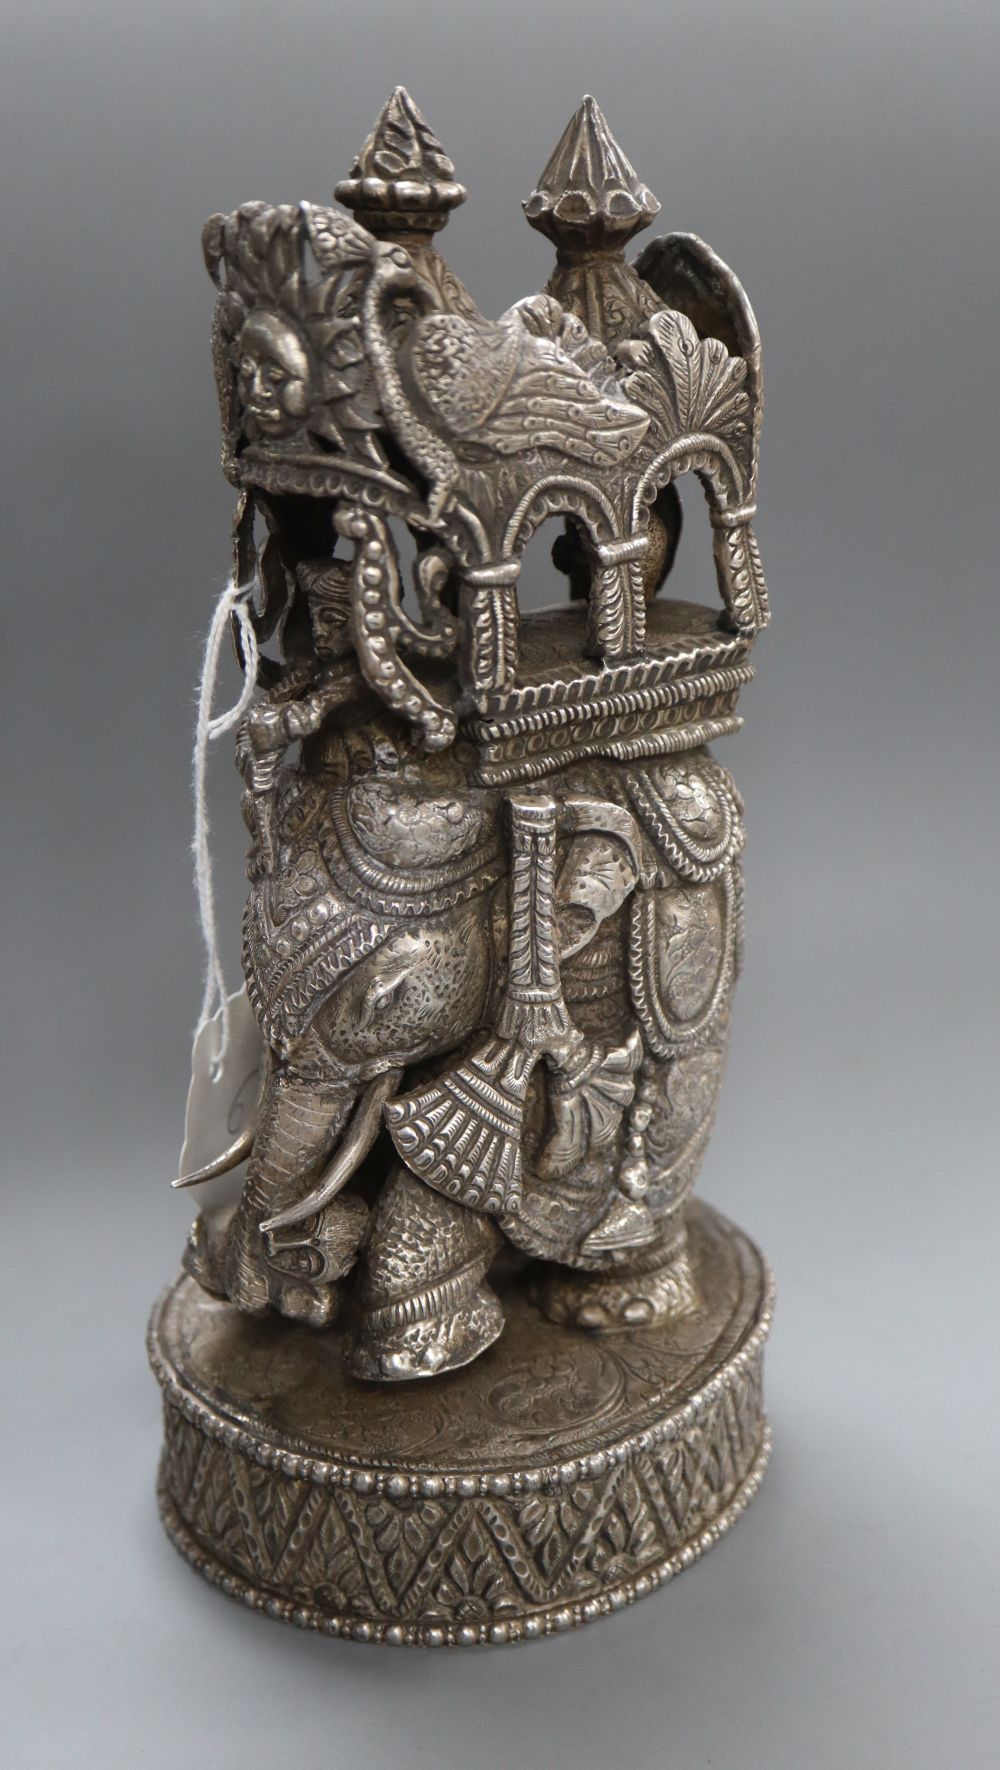 A 20th century Indian white metal model of an elephant with howdah and passengers, height 22.4cm, 18.5oz.